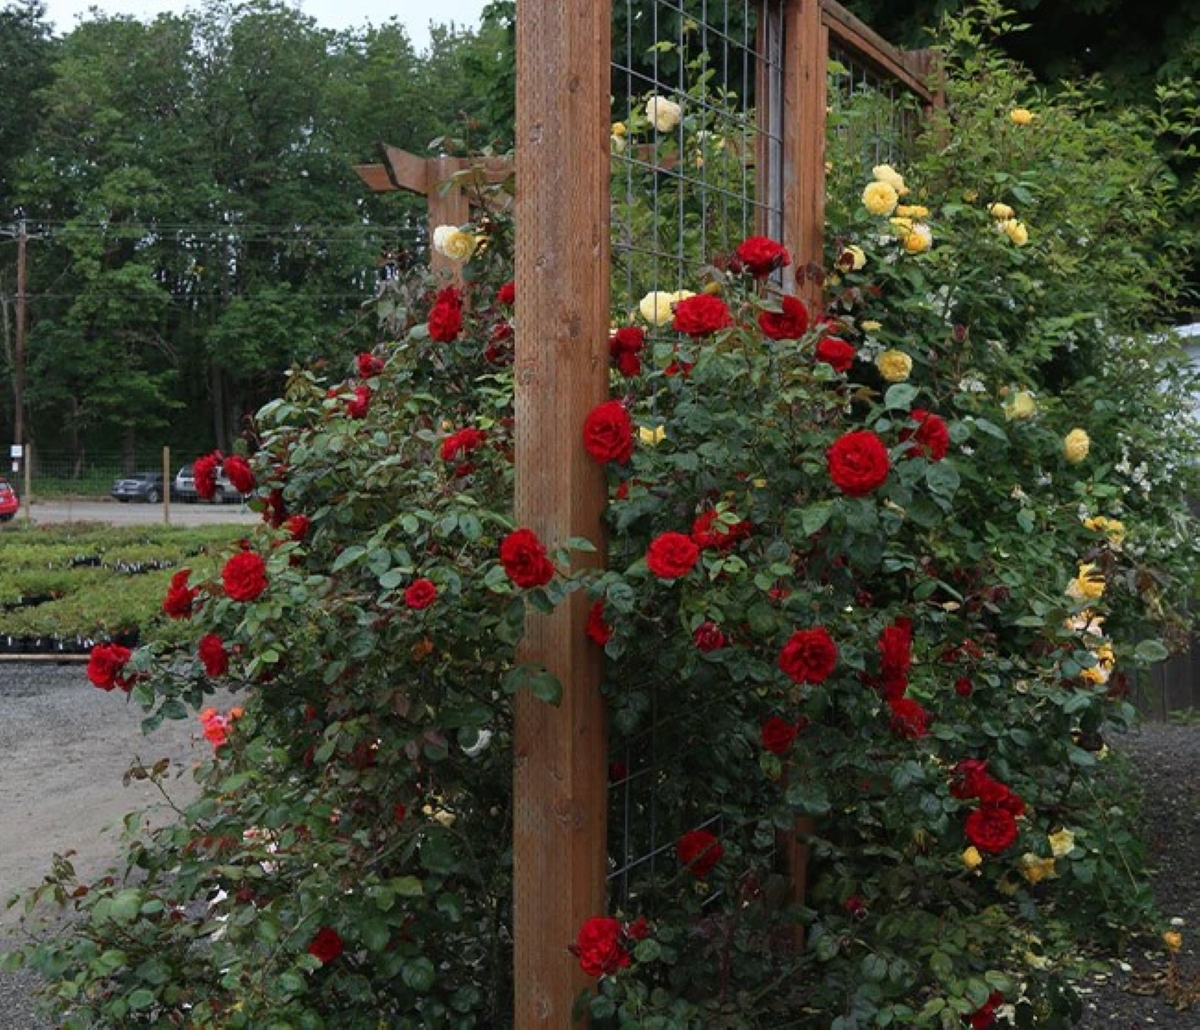 Red roses on trellis